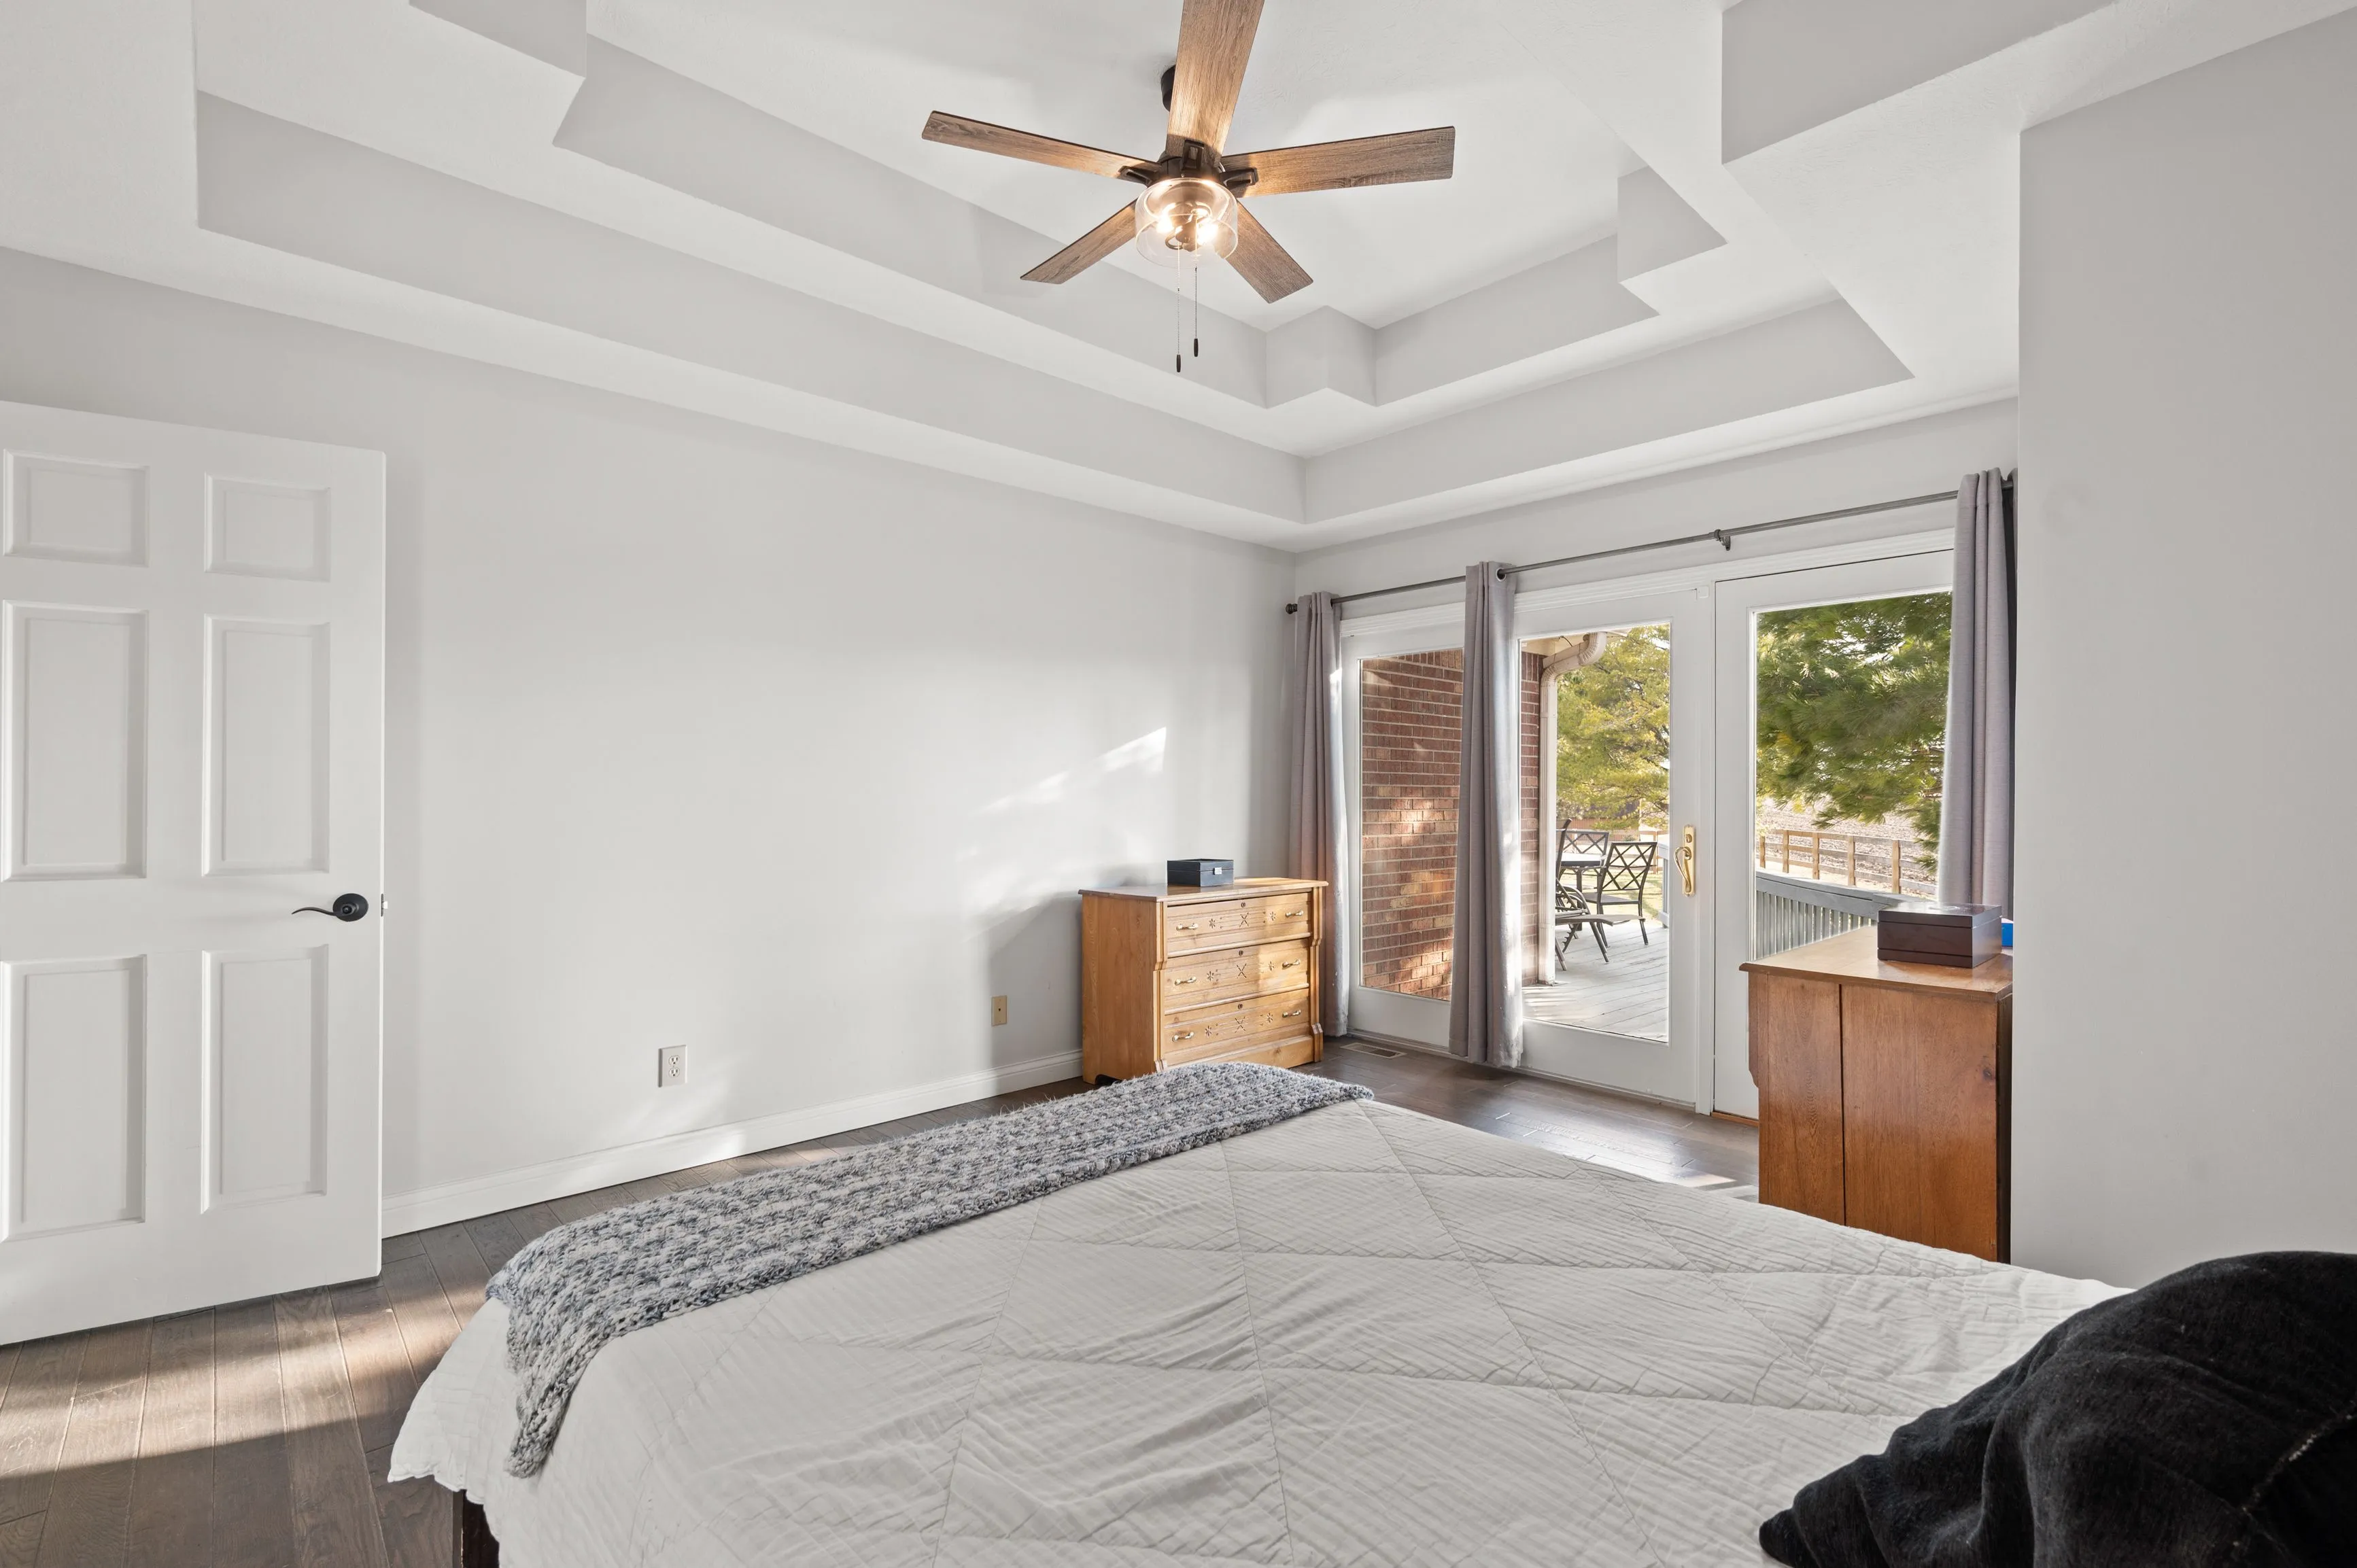 Bright bedroom with a vaulted ceiling and fan, hardwood floors, a sliding door leading to a balcony, and a simple dresser and bed with linens.